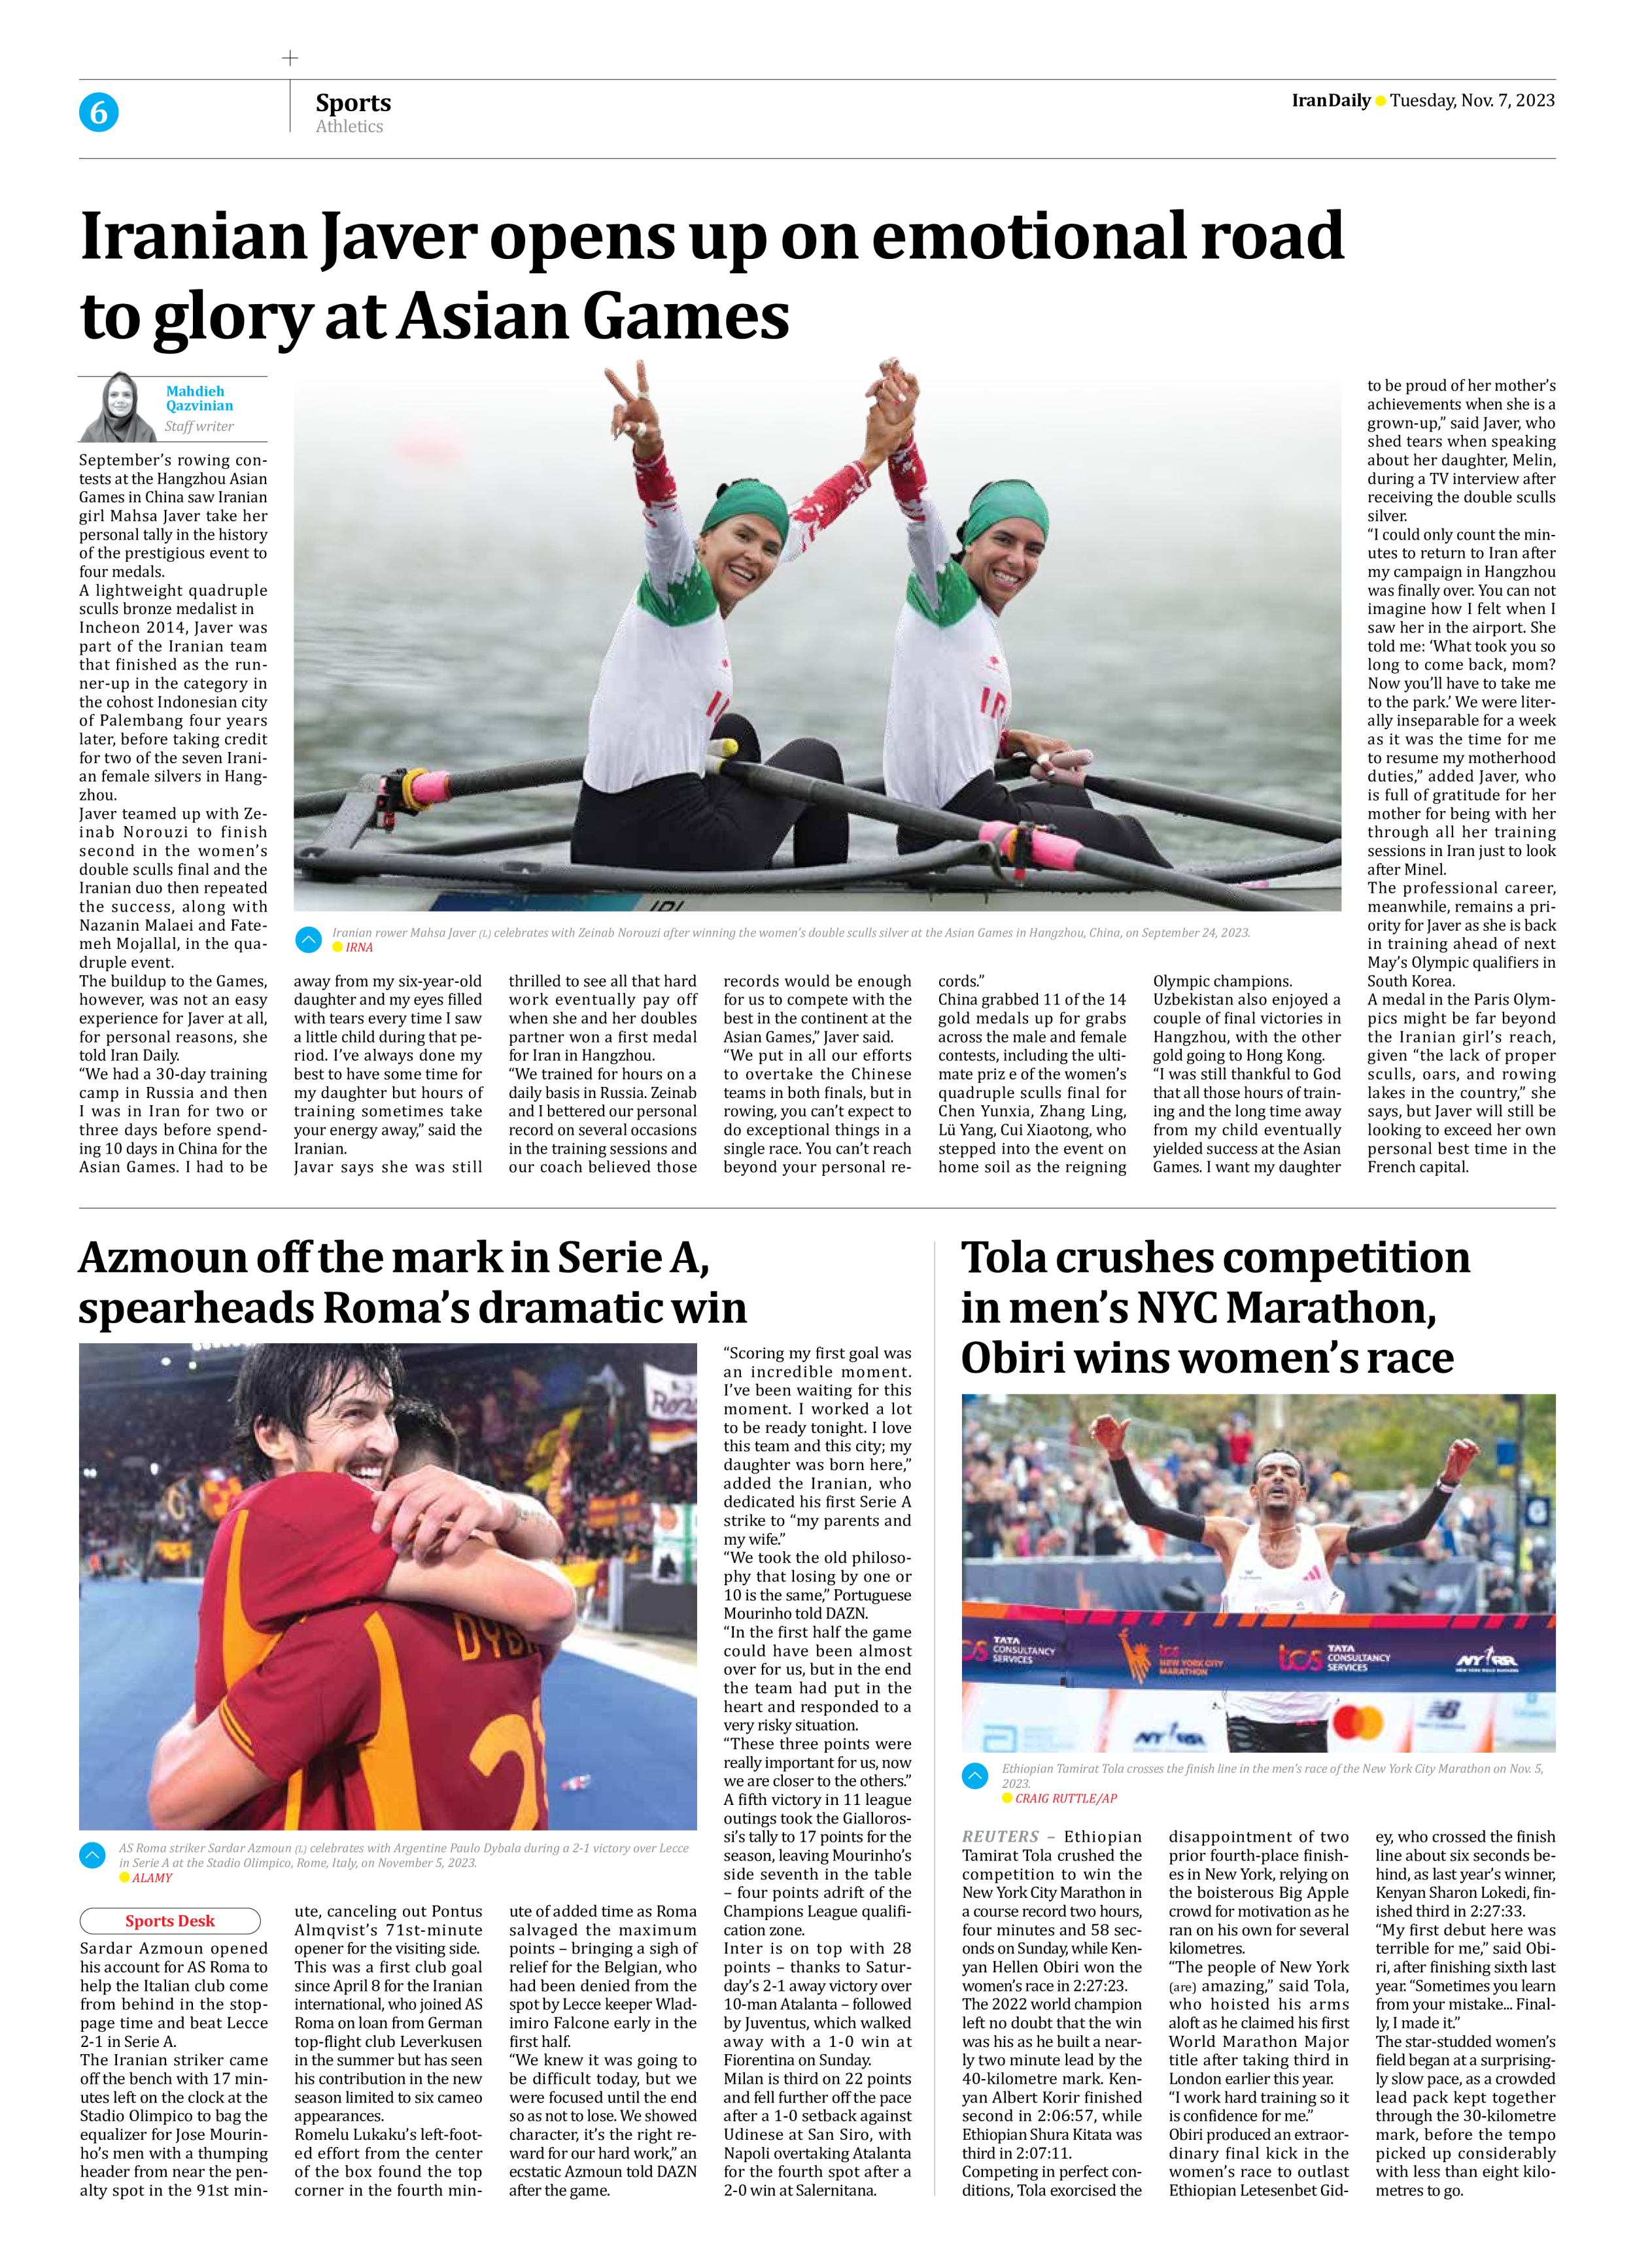 Iran Daily - Number Seven Thousand Four Hundred and Twenty Eight - 07 November 2023 - Page 6